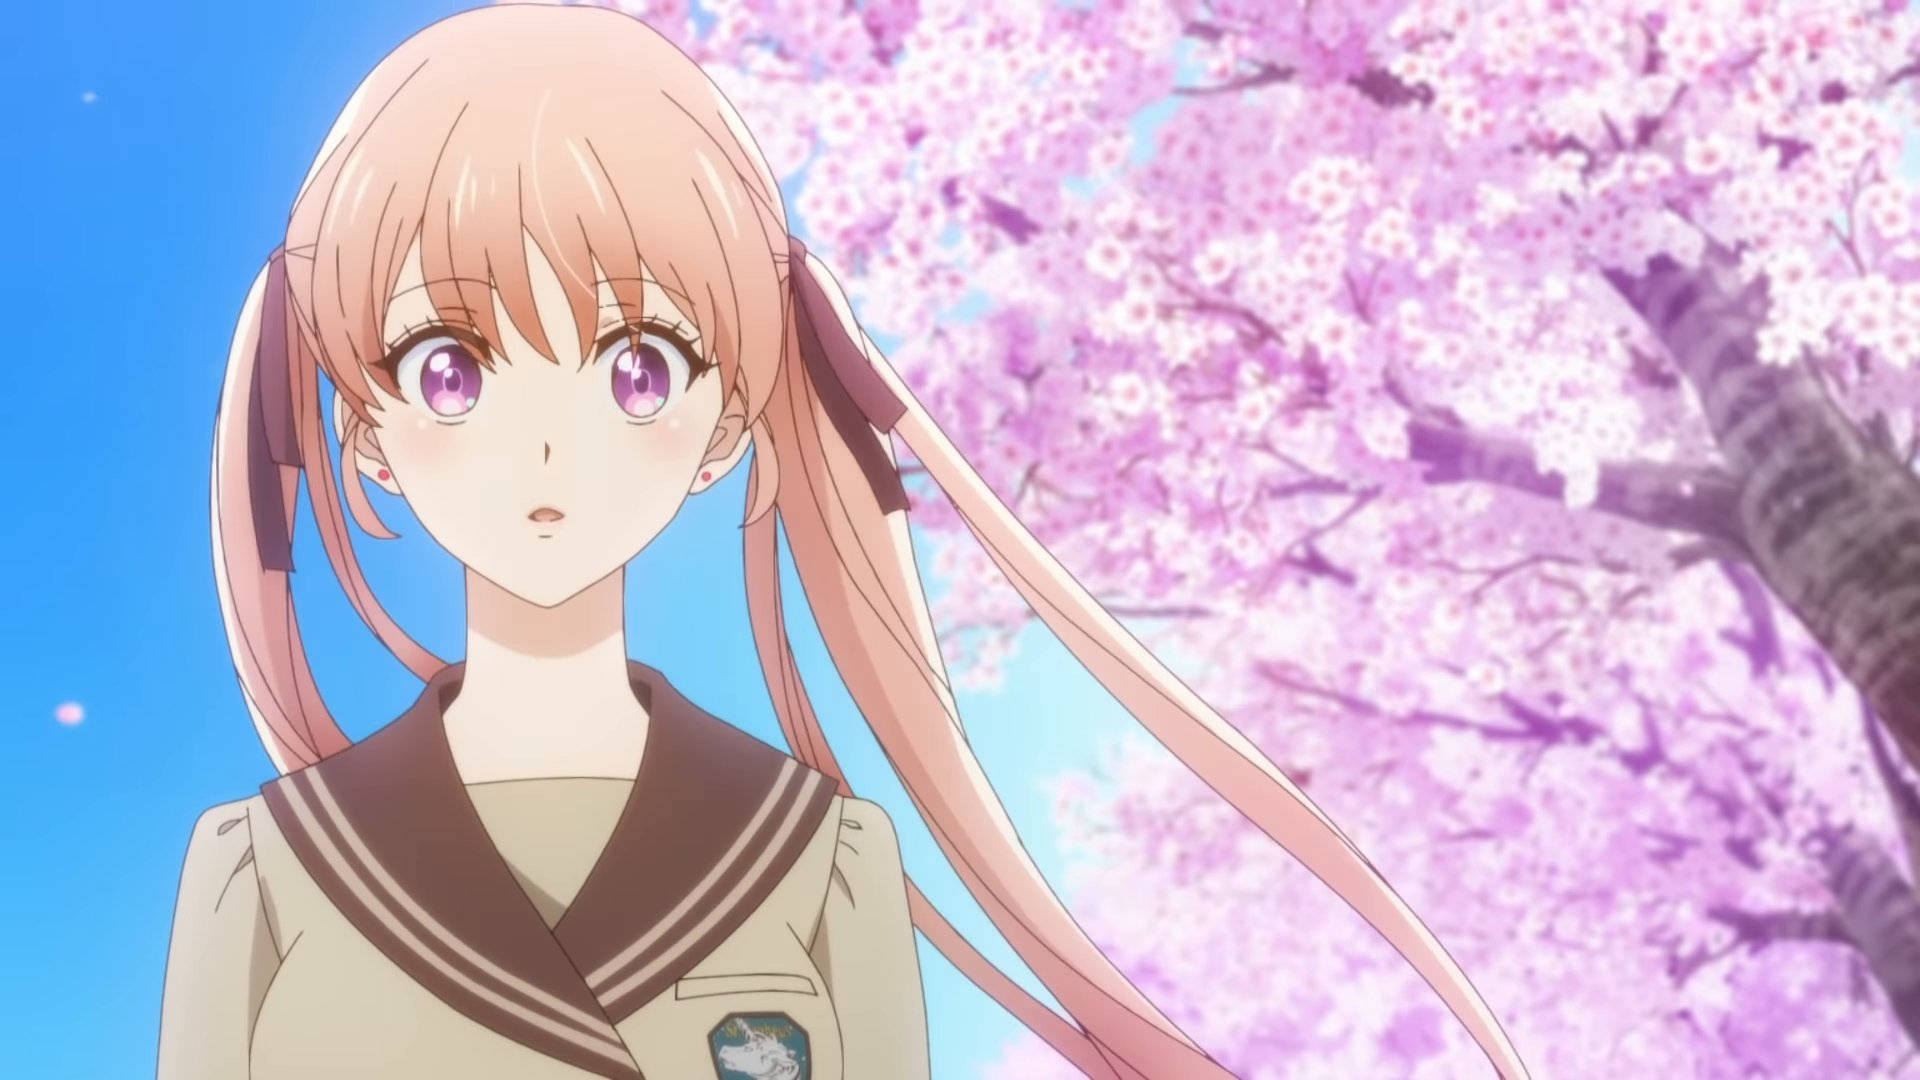 Erika Surrounded By Cherry Blossoms - A Couple Of Cuckoos Anime Scene